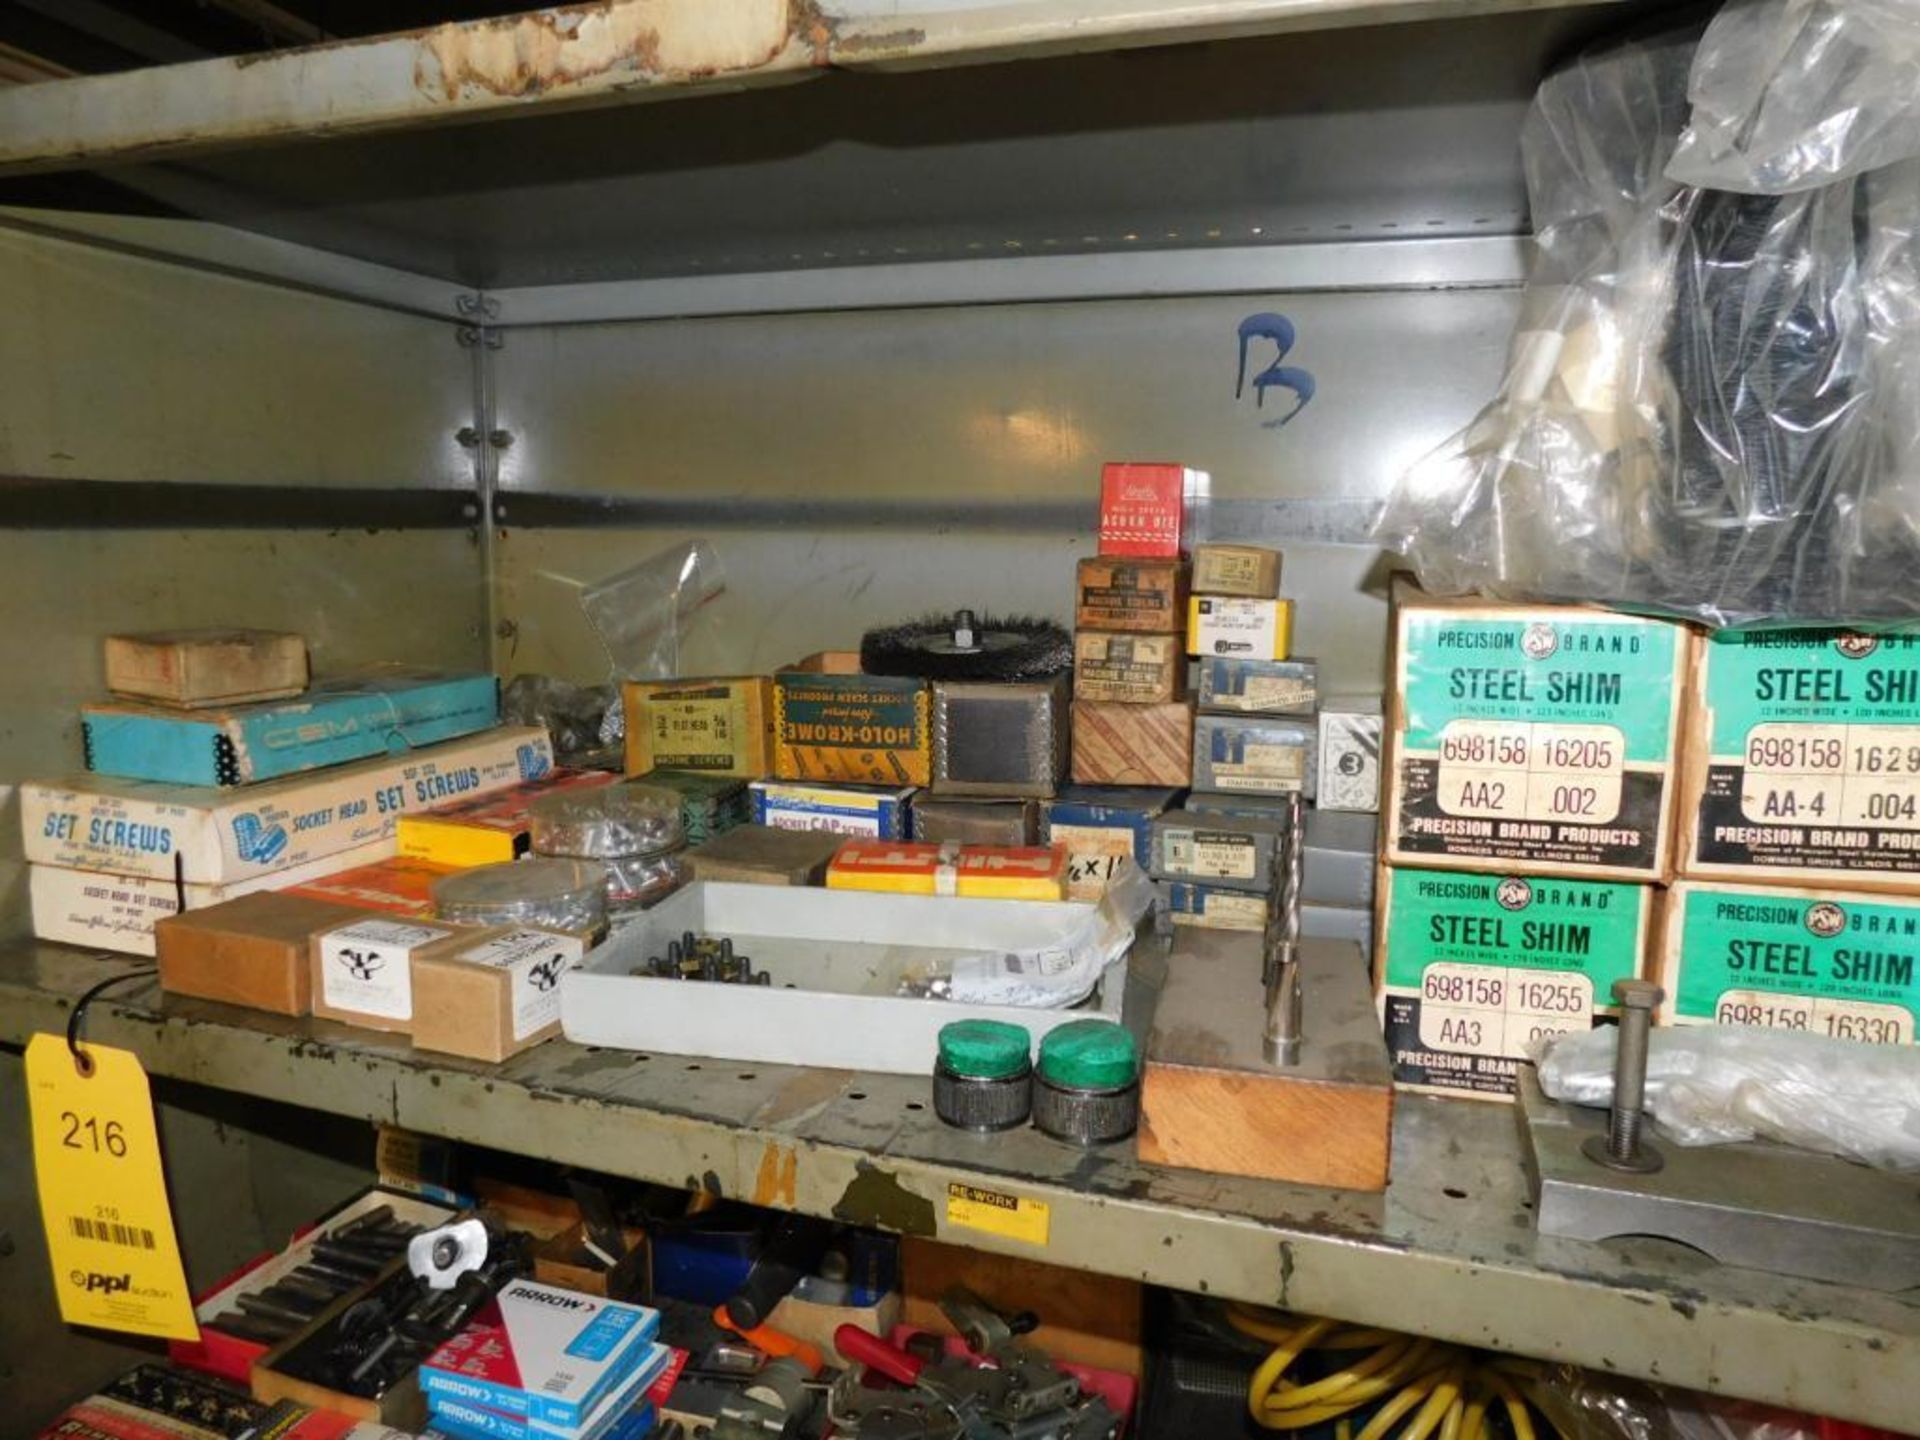 LOT: Metal Shelf w/Contents of Assorted Hardware, Steel Shim, Clamping Accessories, Hold Down Hardwa - Image 3 of 10